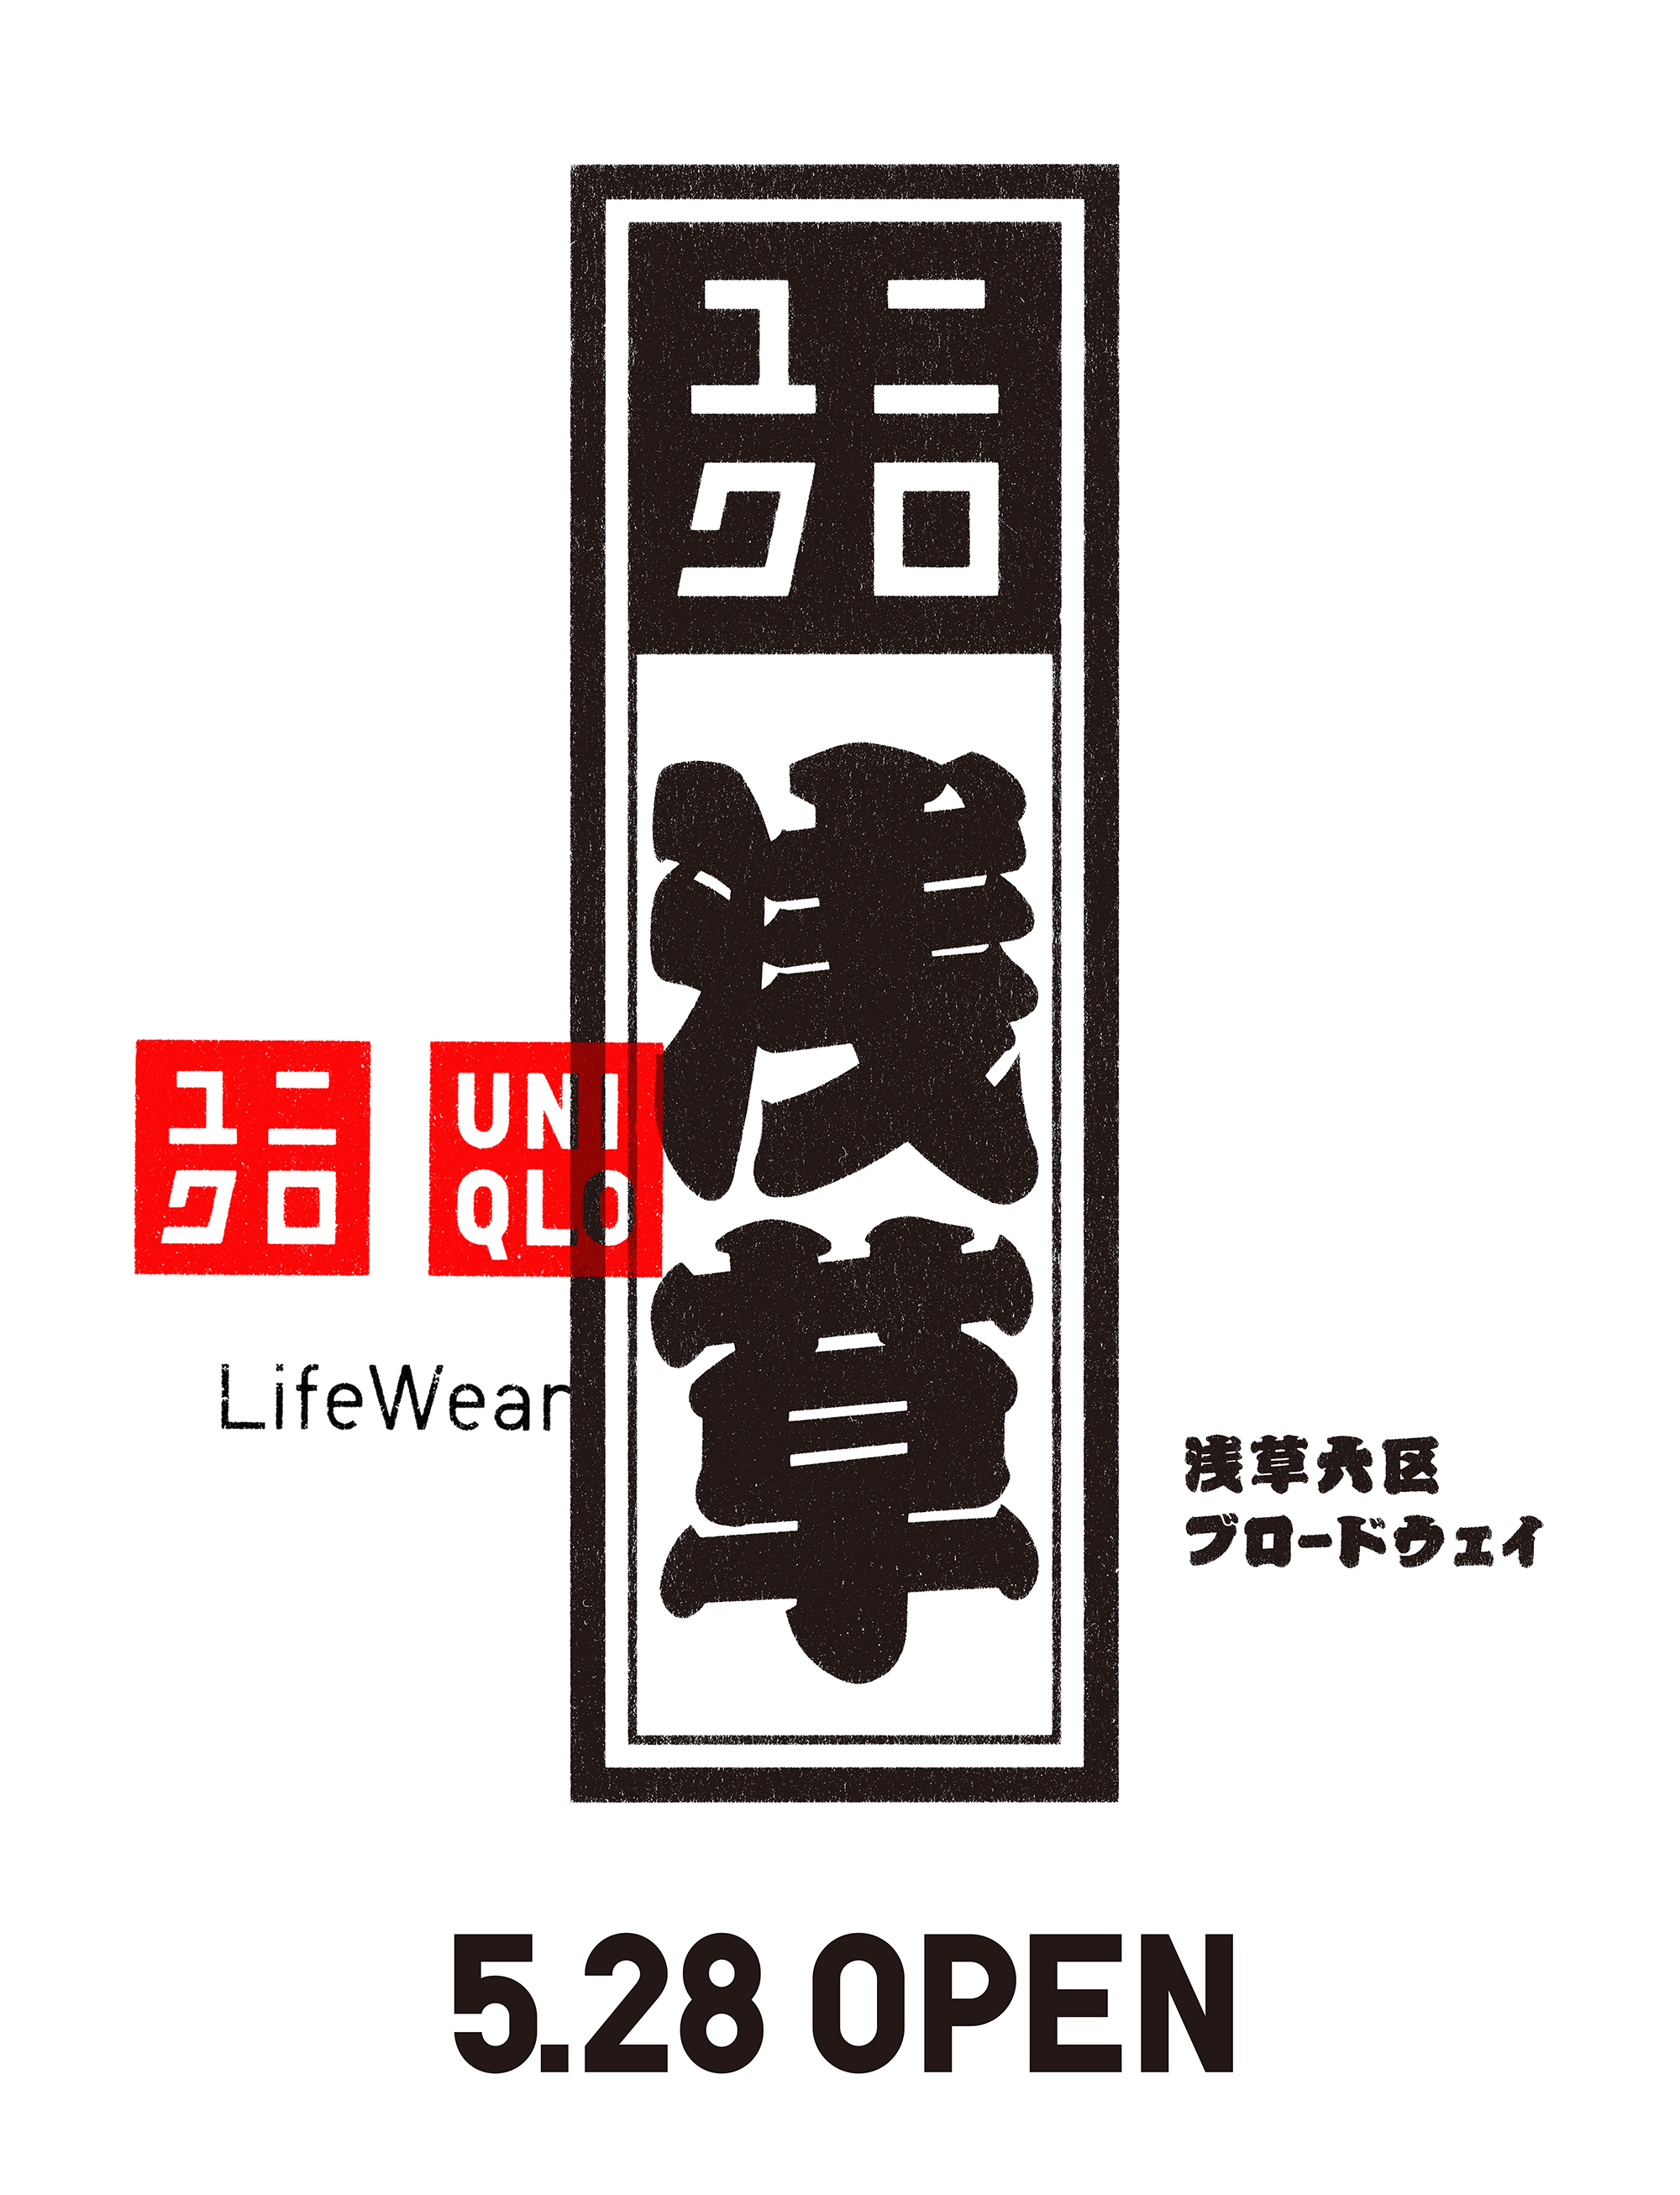 UNIQLO Launches PEACE FOR ALL Charity Tshirt Project  Worldwide sales of  UTs expressing a desire for peace start June 17  FAST RETAILING CO LTD